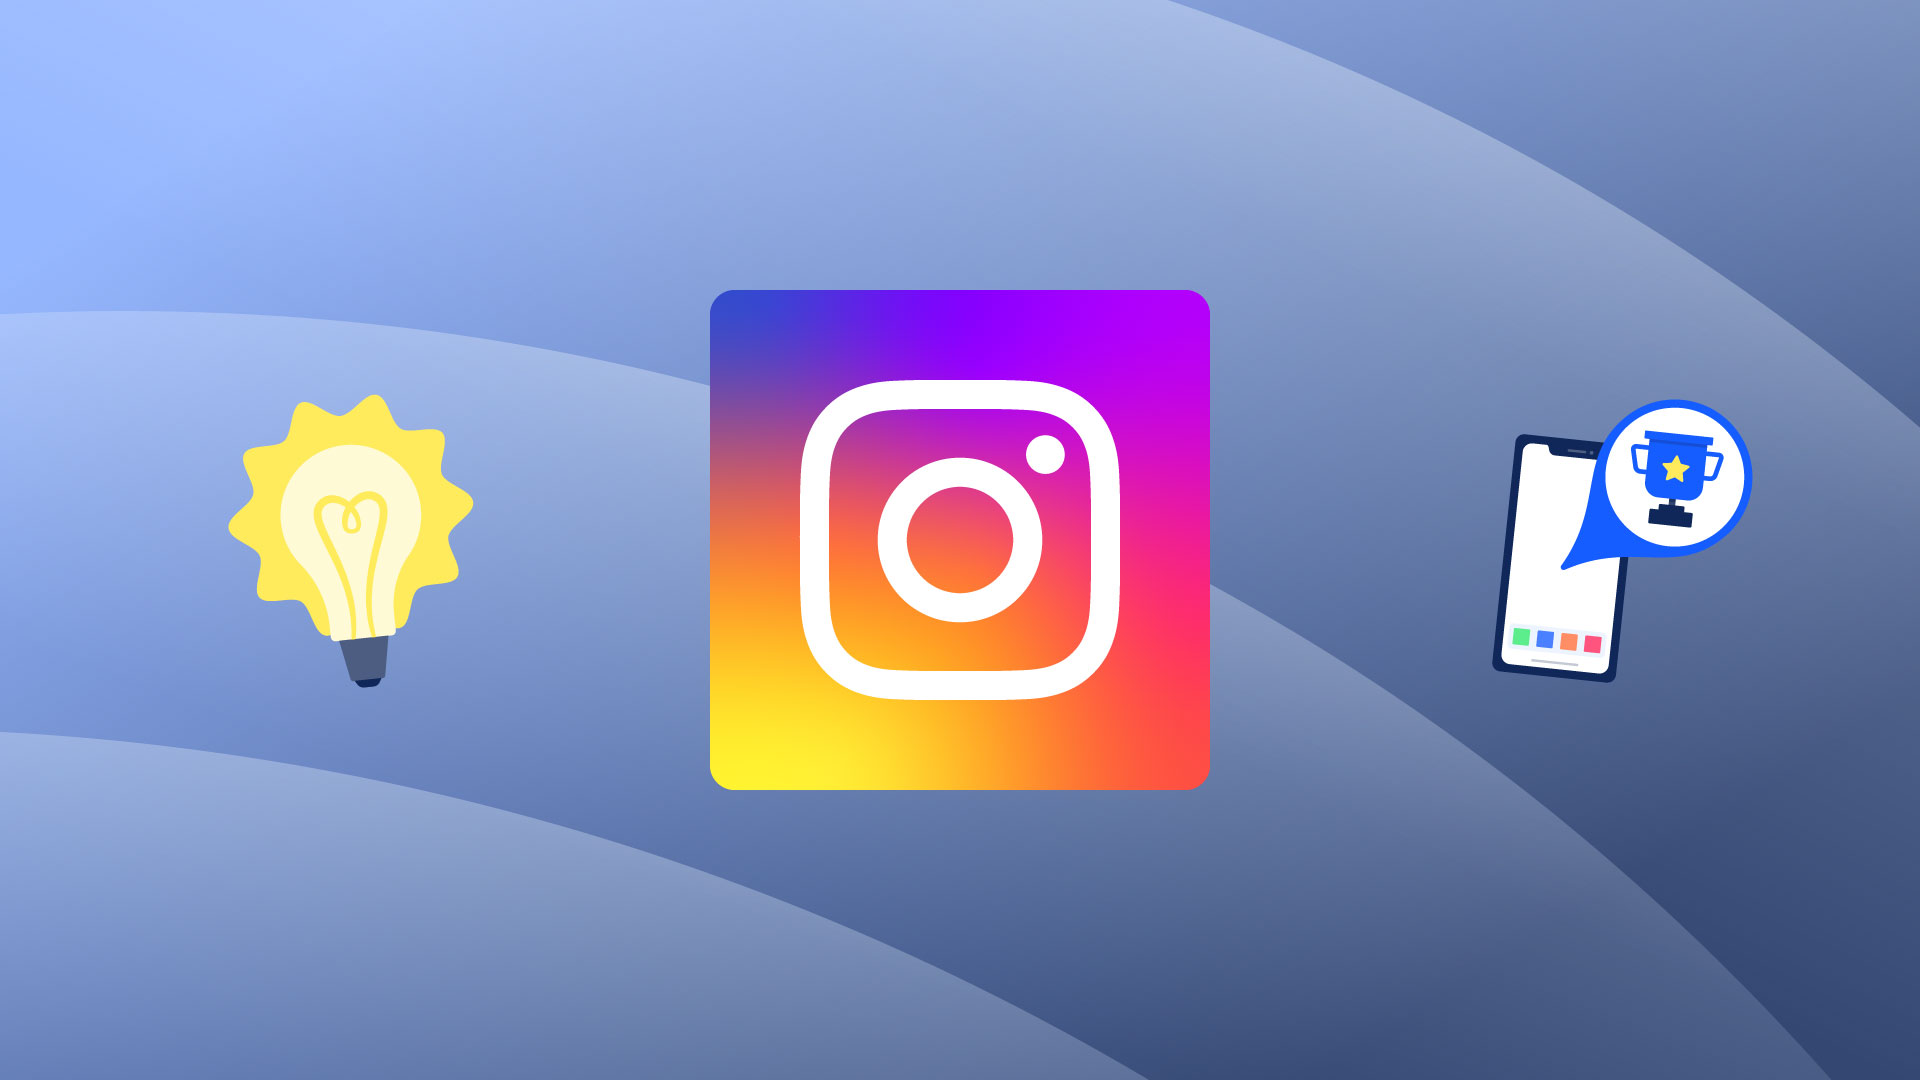 Instagram Comment Picker: Ideas & Examples Done Right – Woobox Blog